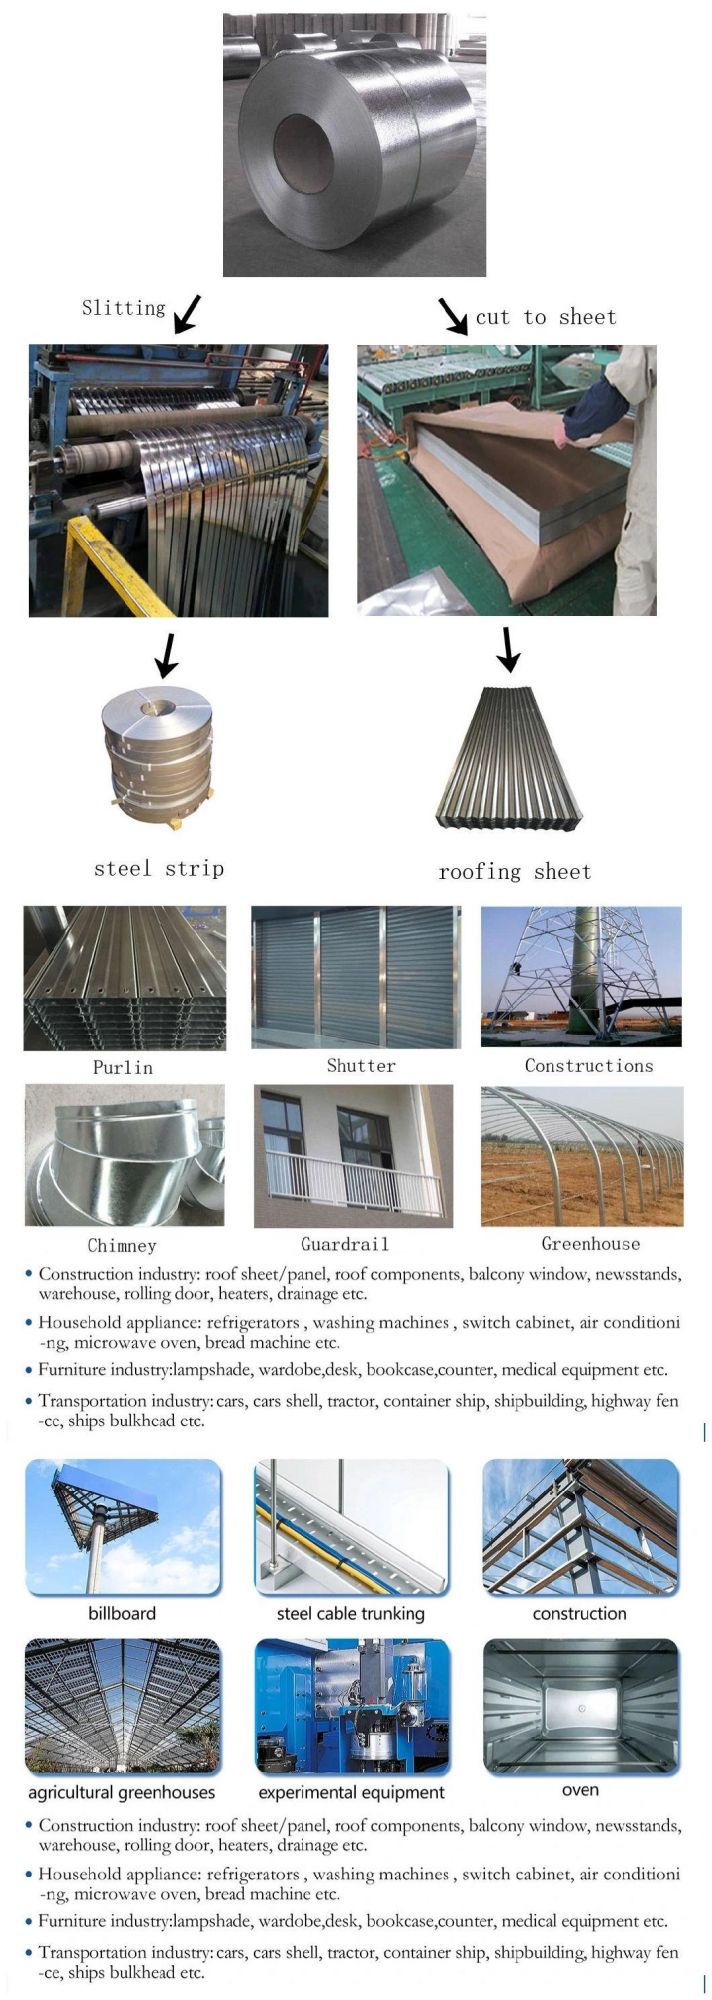 Shandong Manufacture SGCC 0.28*1000mm Gi Coil Hot Dipped Galvanized Steel Coil Price